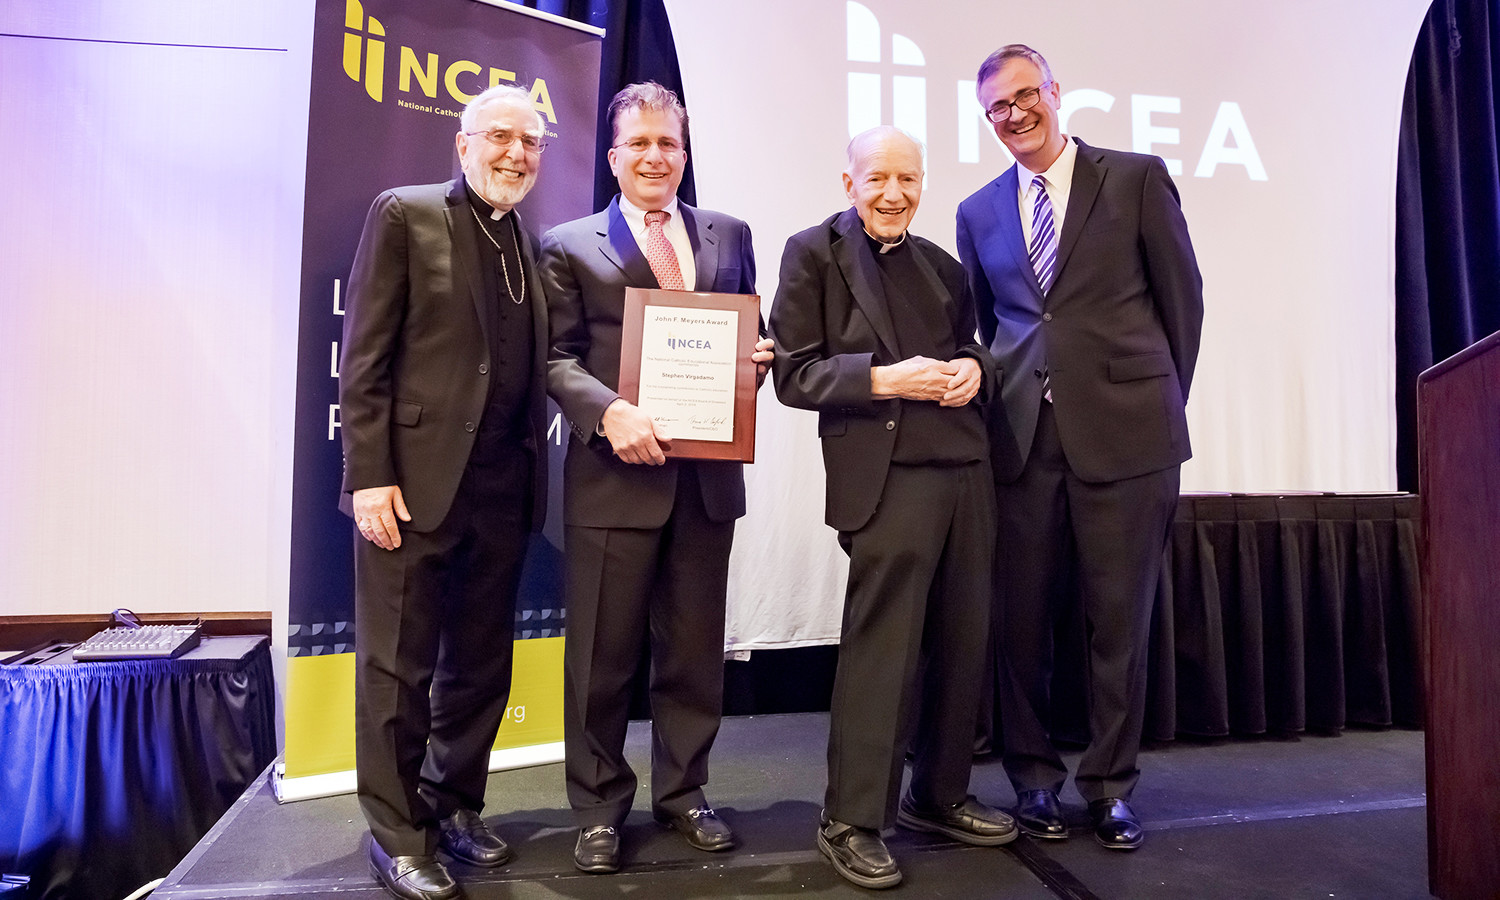 NCEA Board Chair Bishop Gerald Kicanas, far left; honoree Steven Virgadamo, associate superintendent for leadership formation for the archdiocese; Msgr. John F. Meyers, the namesake of Virgadamo’s award; and NCEA President/CEO Dr. Thomas Burnford smile broadly after Virgadamo was recognized at an awards banquet April 2 at the National Catholic Educational Convention & Expo in Cincinnati.